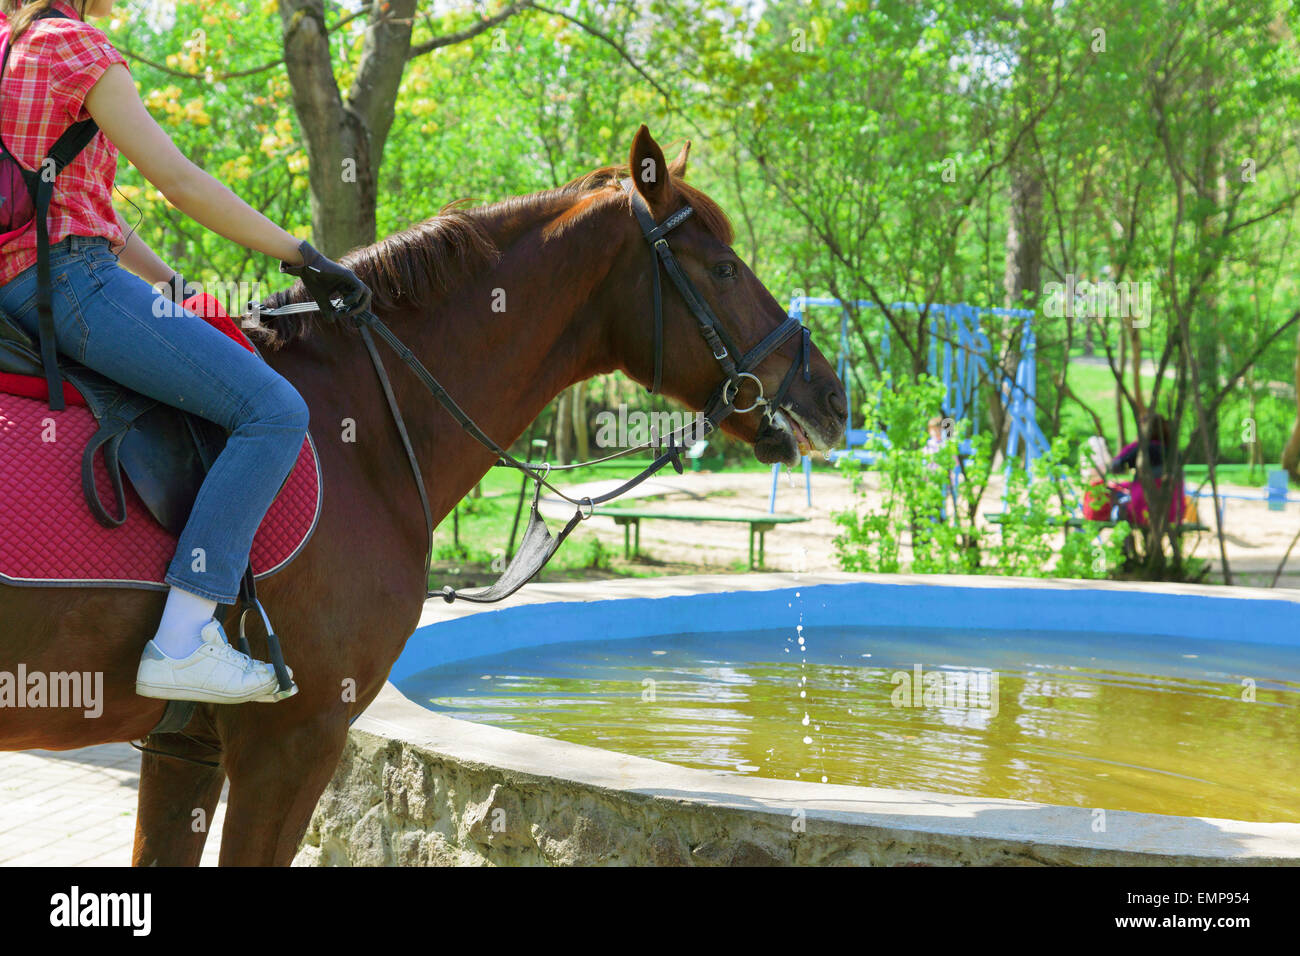 Drinking water from the pool a horse with the equestrian on a back. Stock Photo